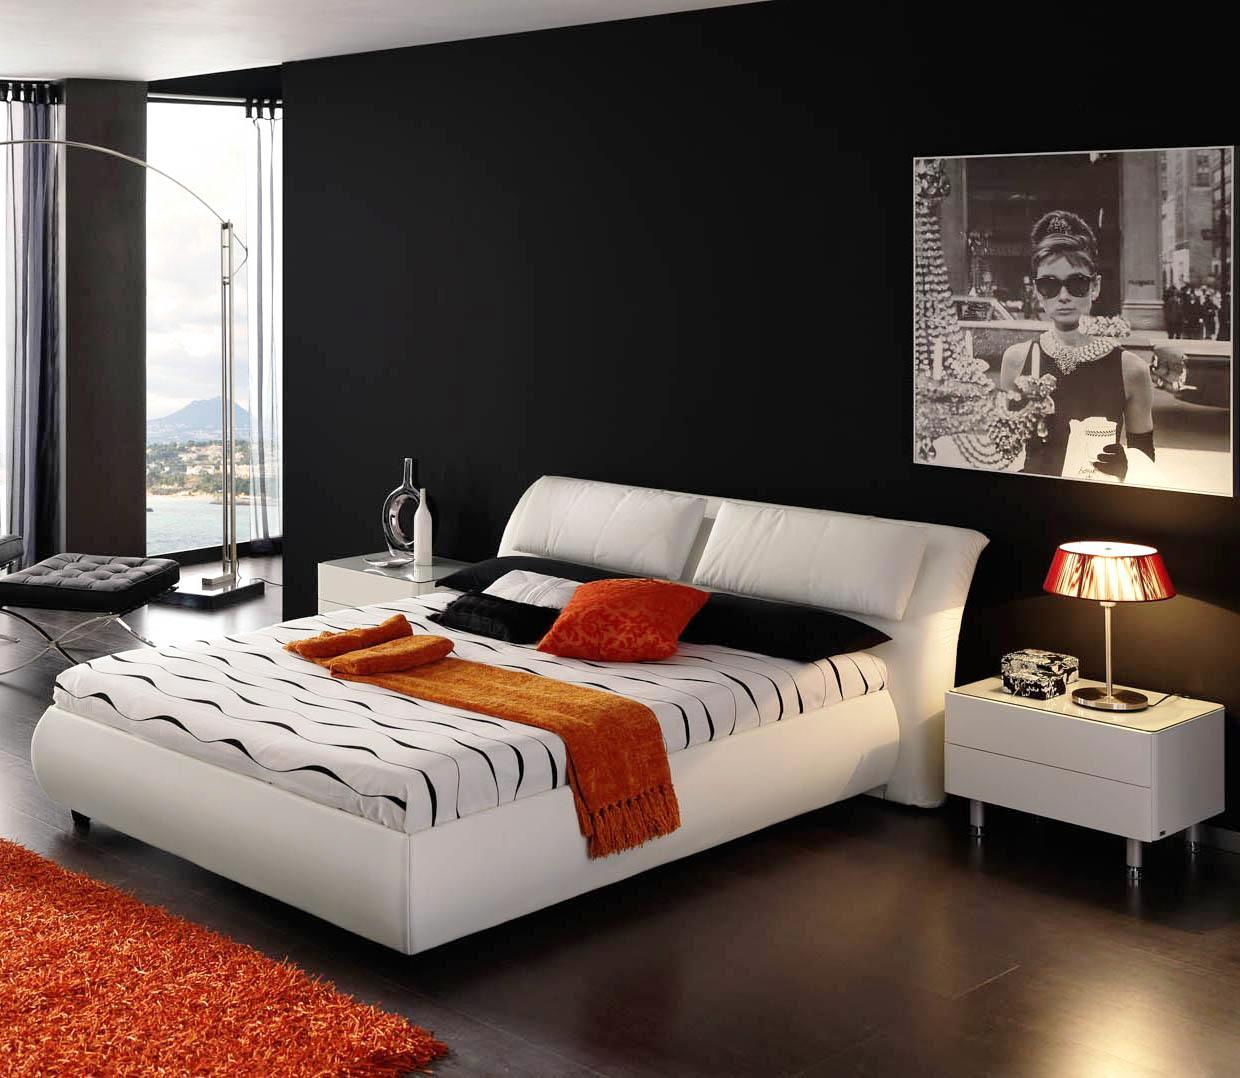 Mens Bedroom Black Awesome Men's Bedroom Ideas With Black Accent Wall Color Furnished With White Queen Bed And Twin Nightstands Also Completed With Orange Soft Rug Bedroom Mens Bedroom Ideas: The Design Character